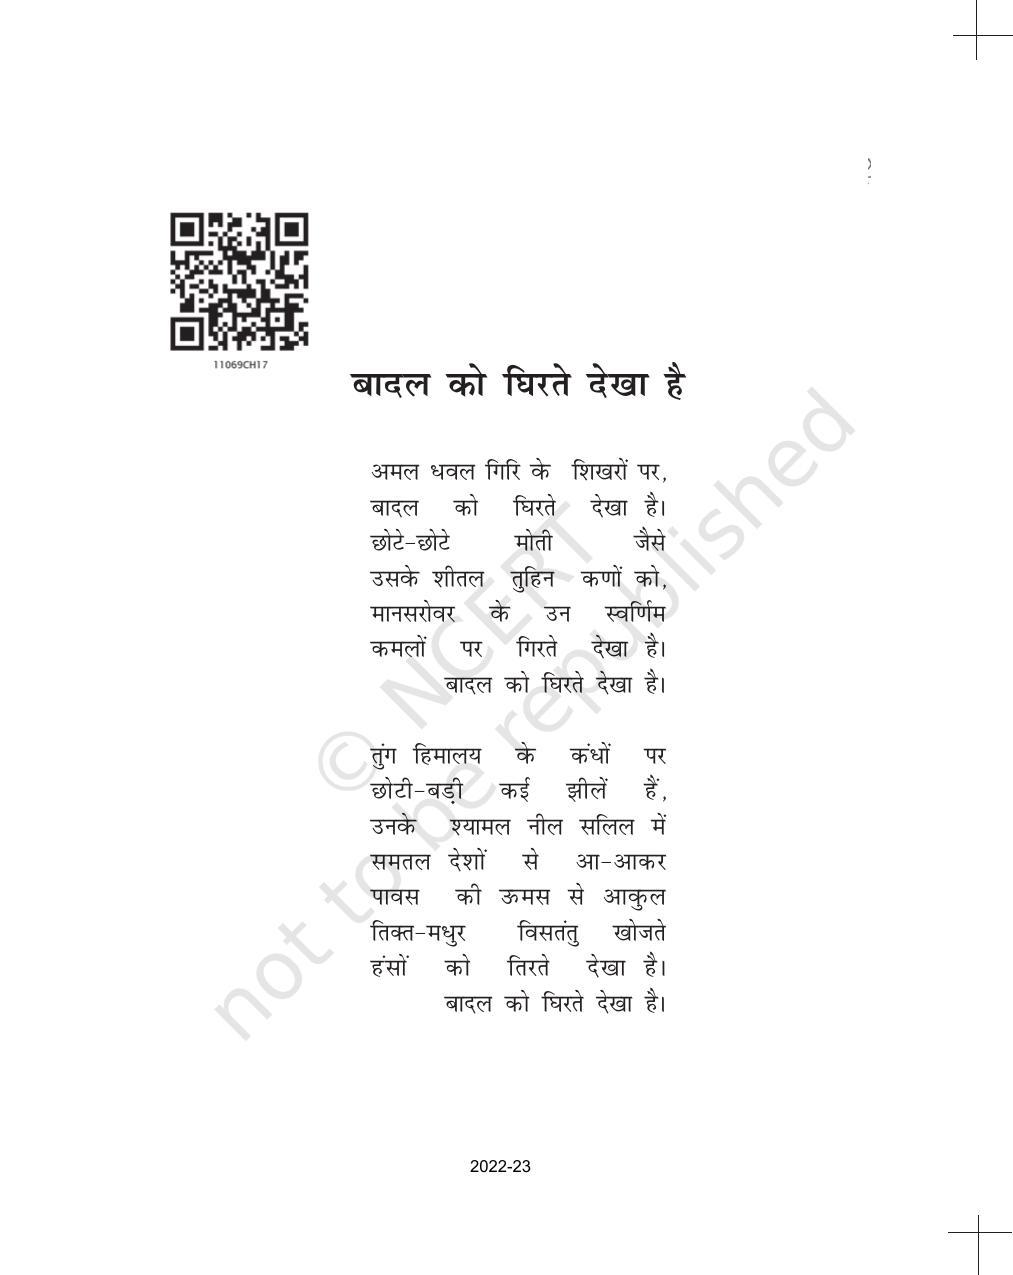 NCERT Book for Class 11 Hindi Antra Chapter 17 नागार्जुन - Page 3